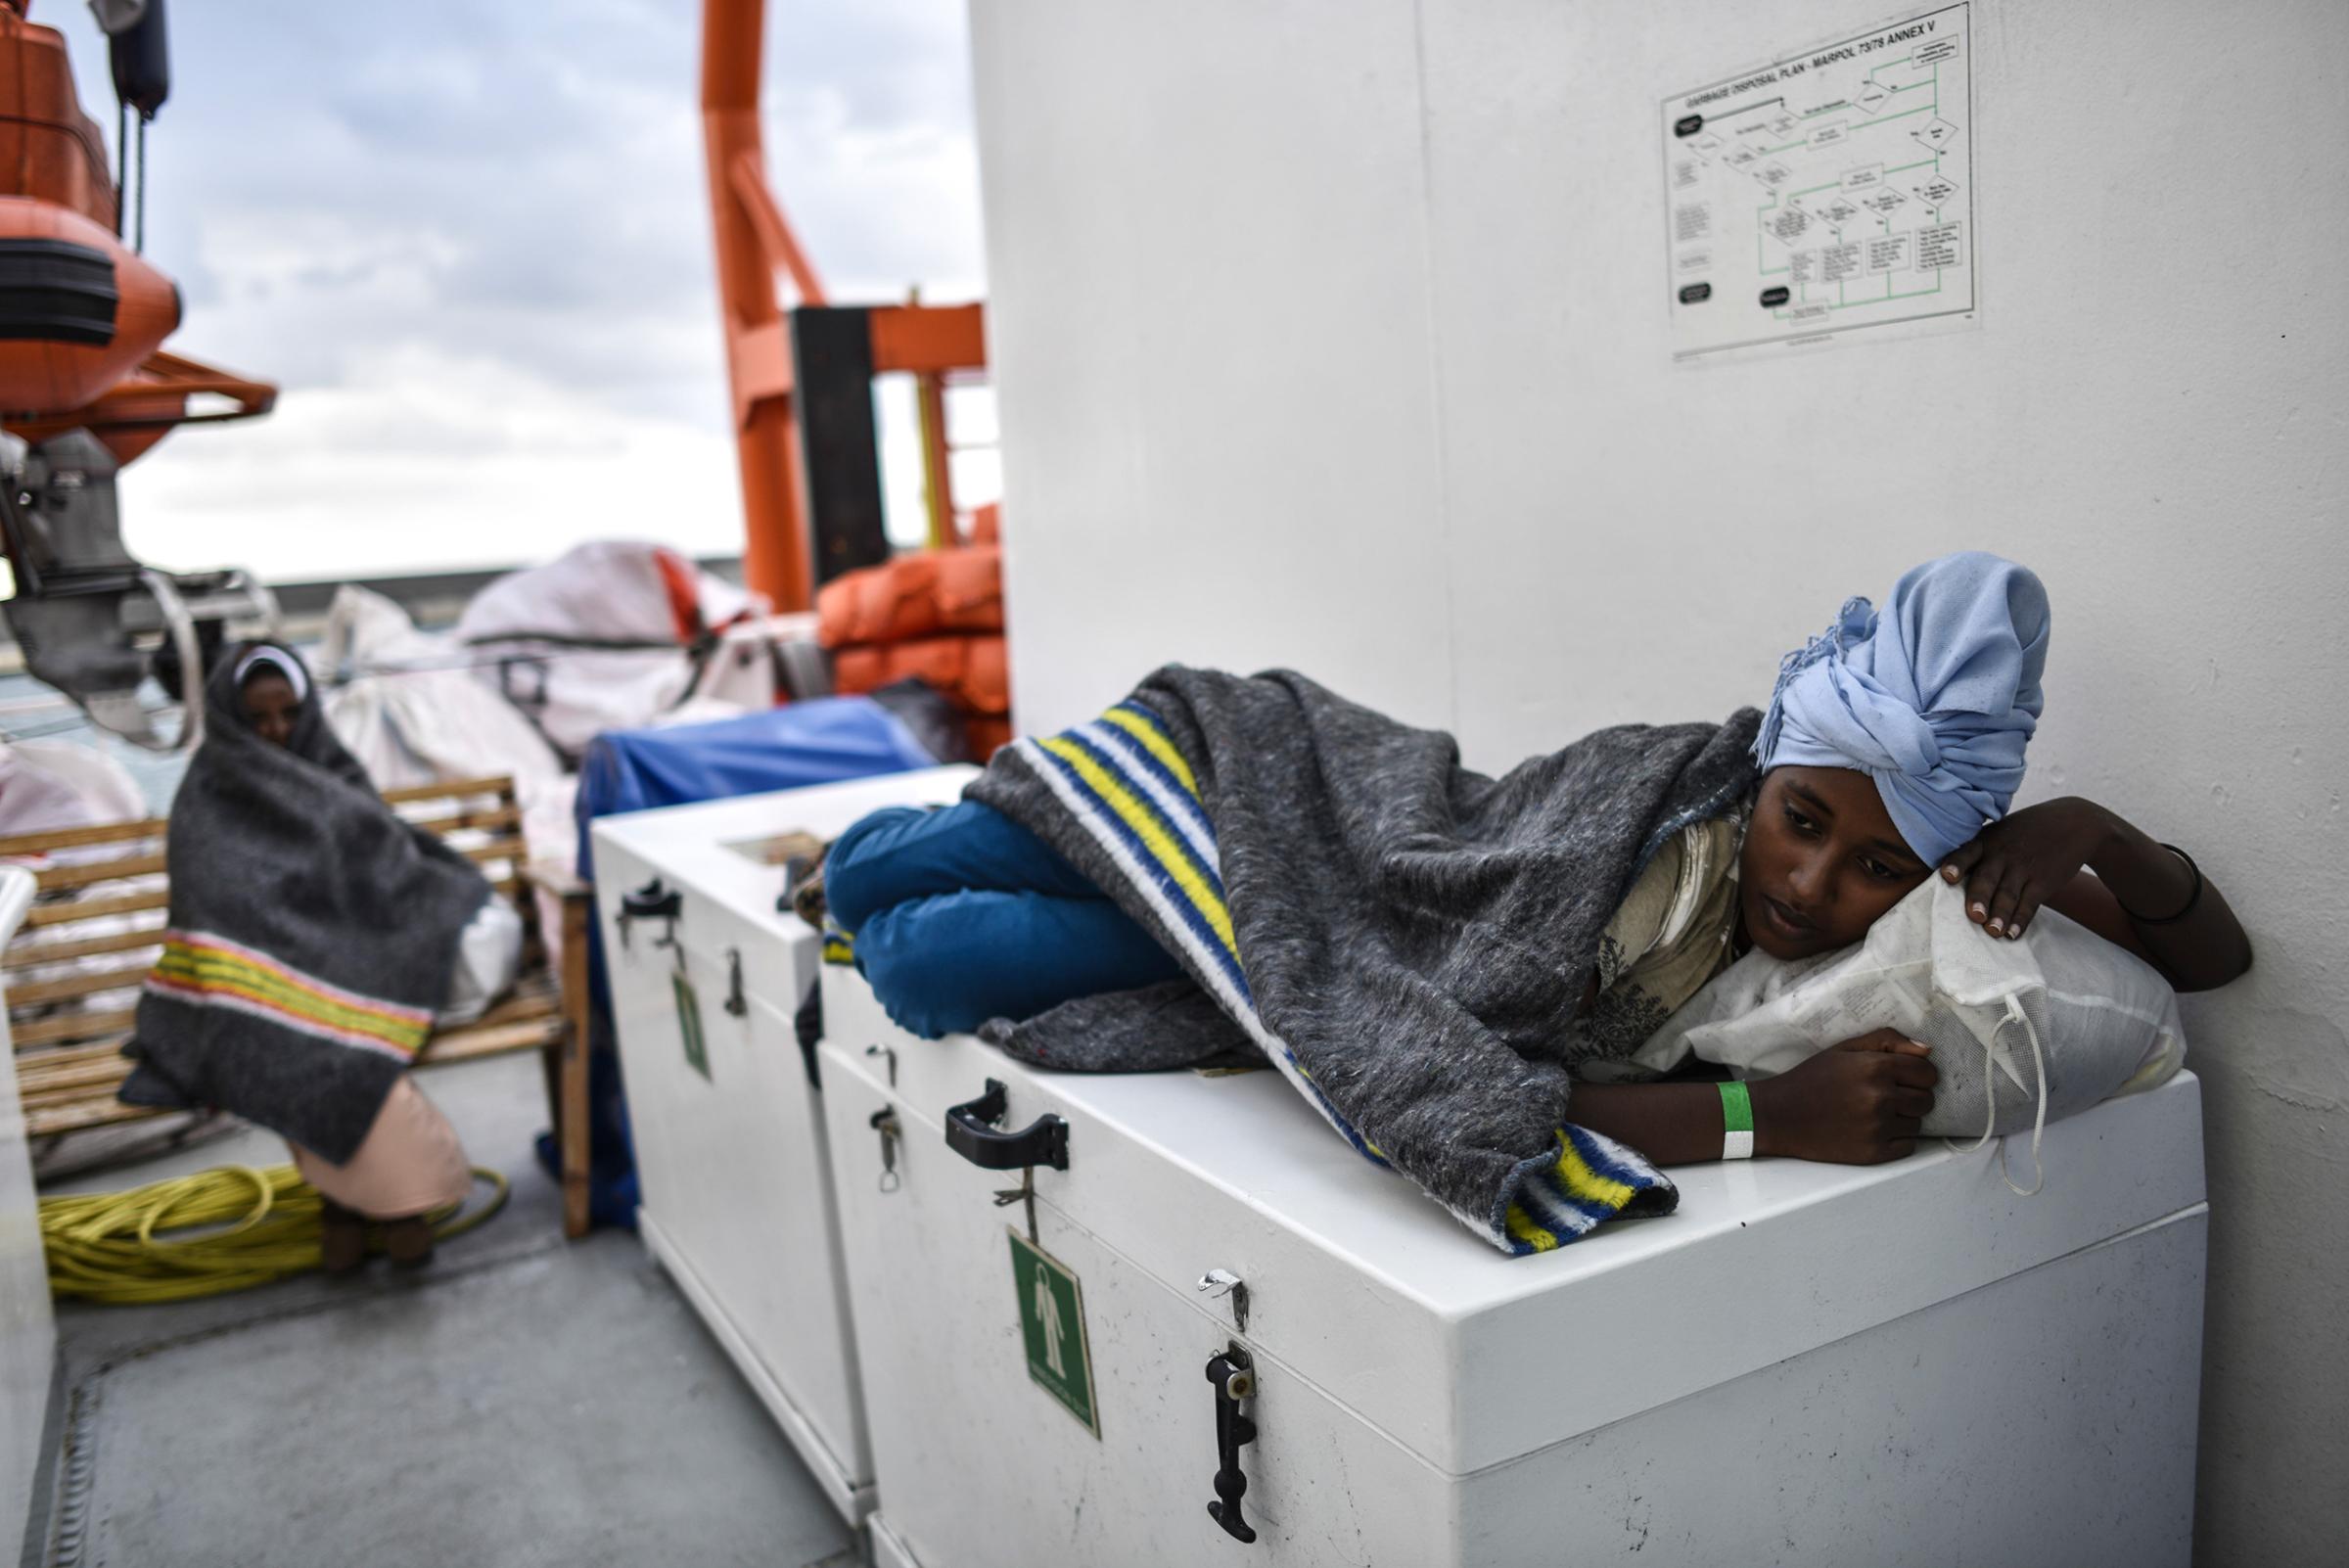 A young migrant woman rests on the deck as the ship sails to Italy, Aug. 23, 2016.